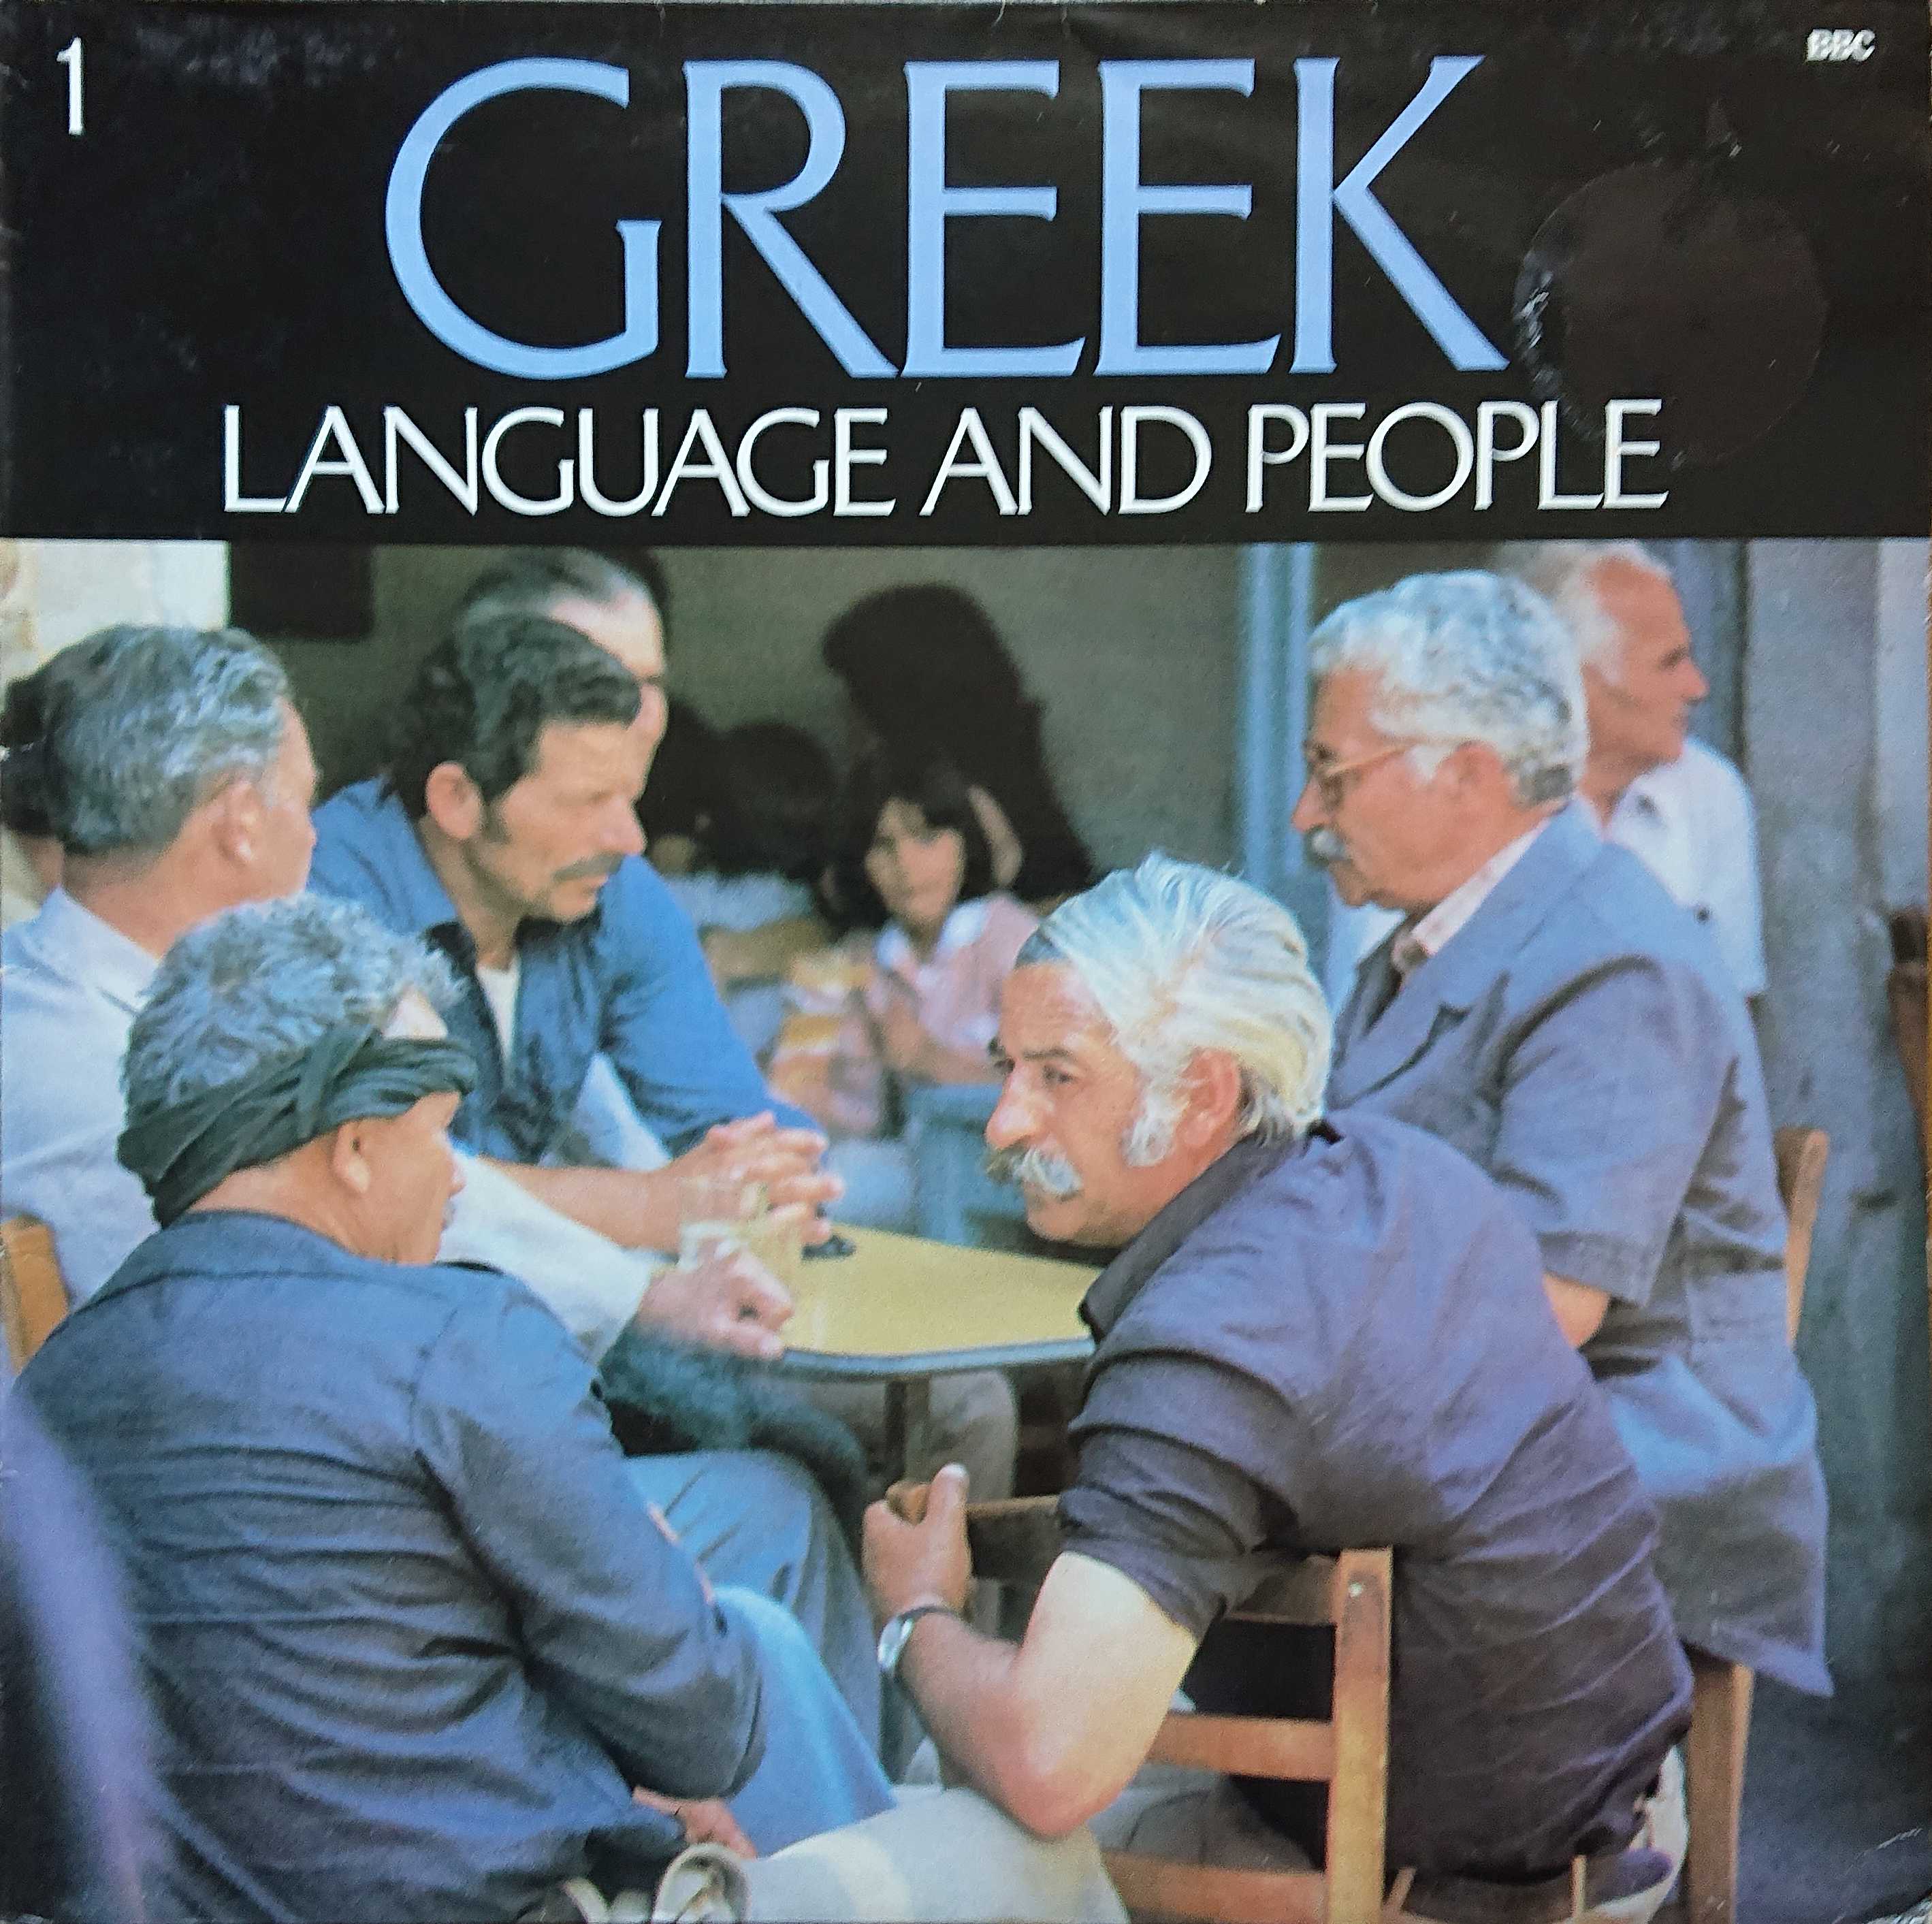 Picture of OP 269 Greek language and people by artist David A. Hardy